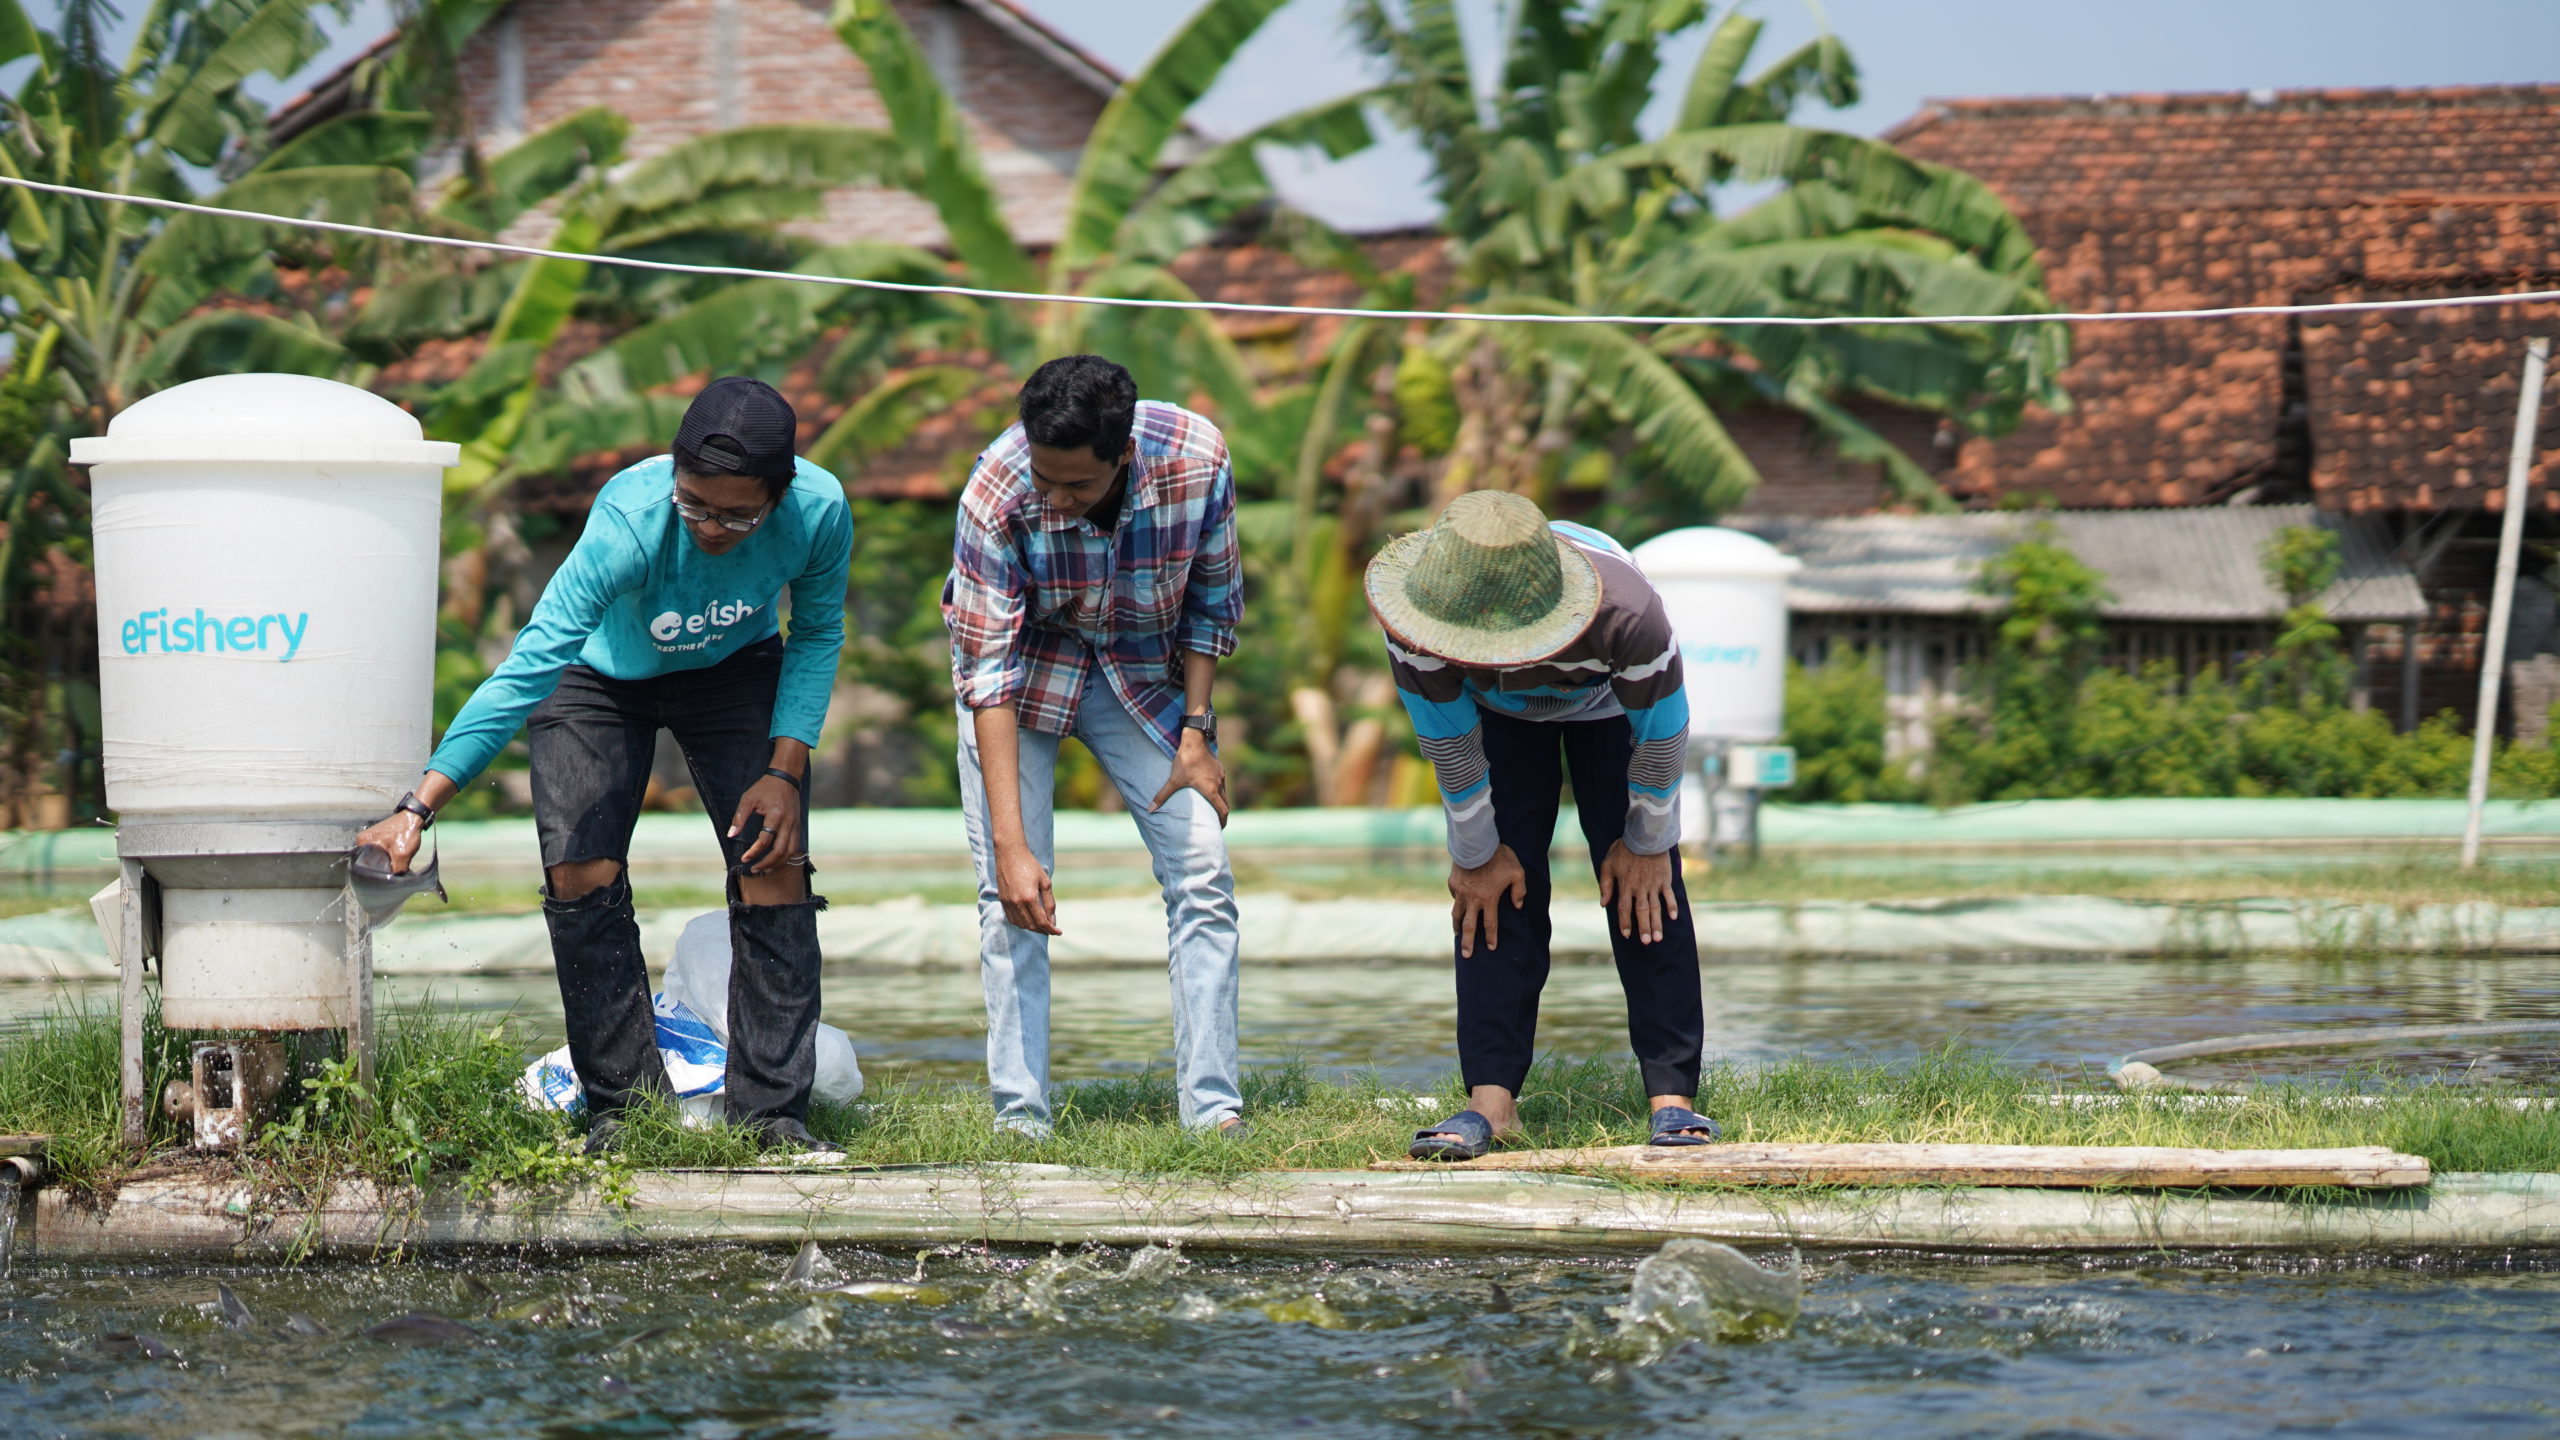 eFishery is recruiting new talent to transform aquaculture in every Indonesian province